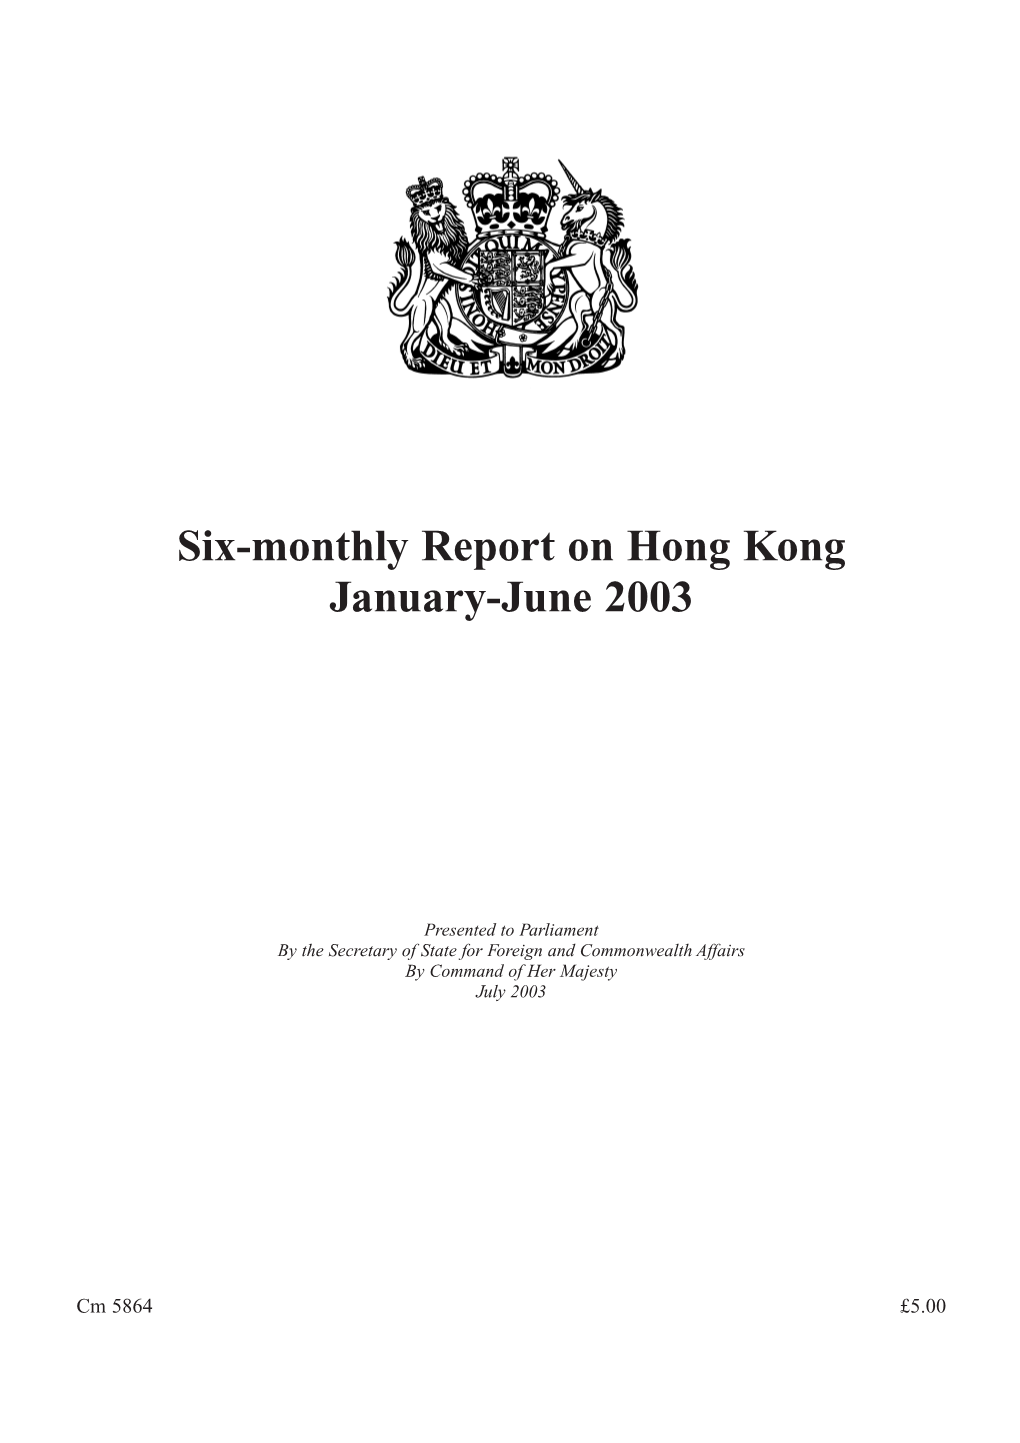 Six-Monthly Report on Hong Kong January-June 2003